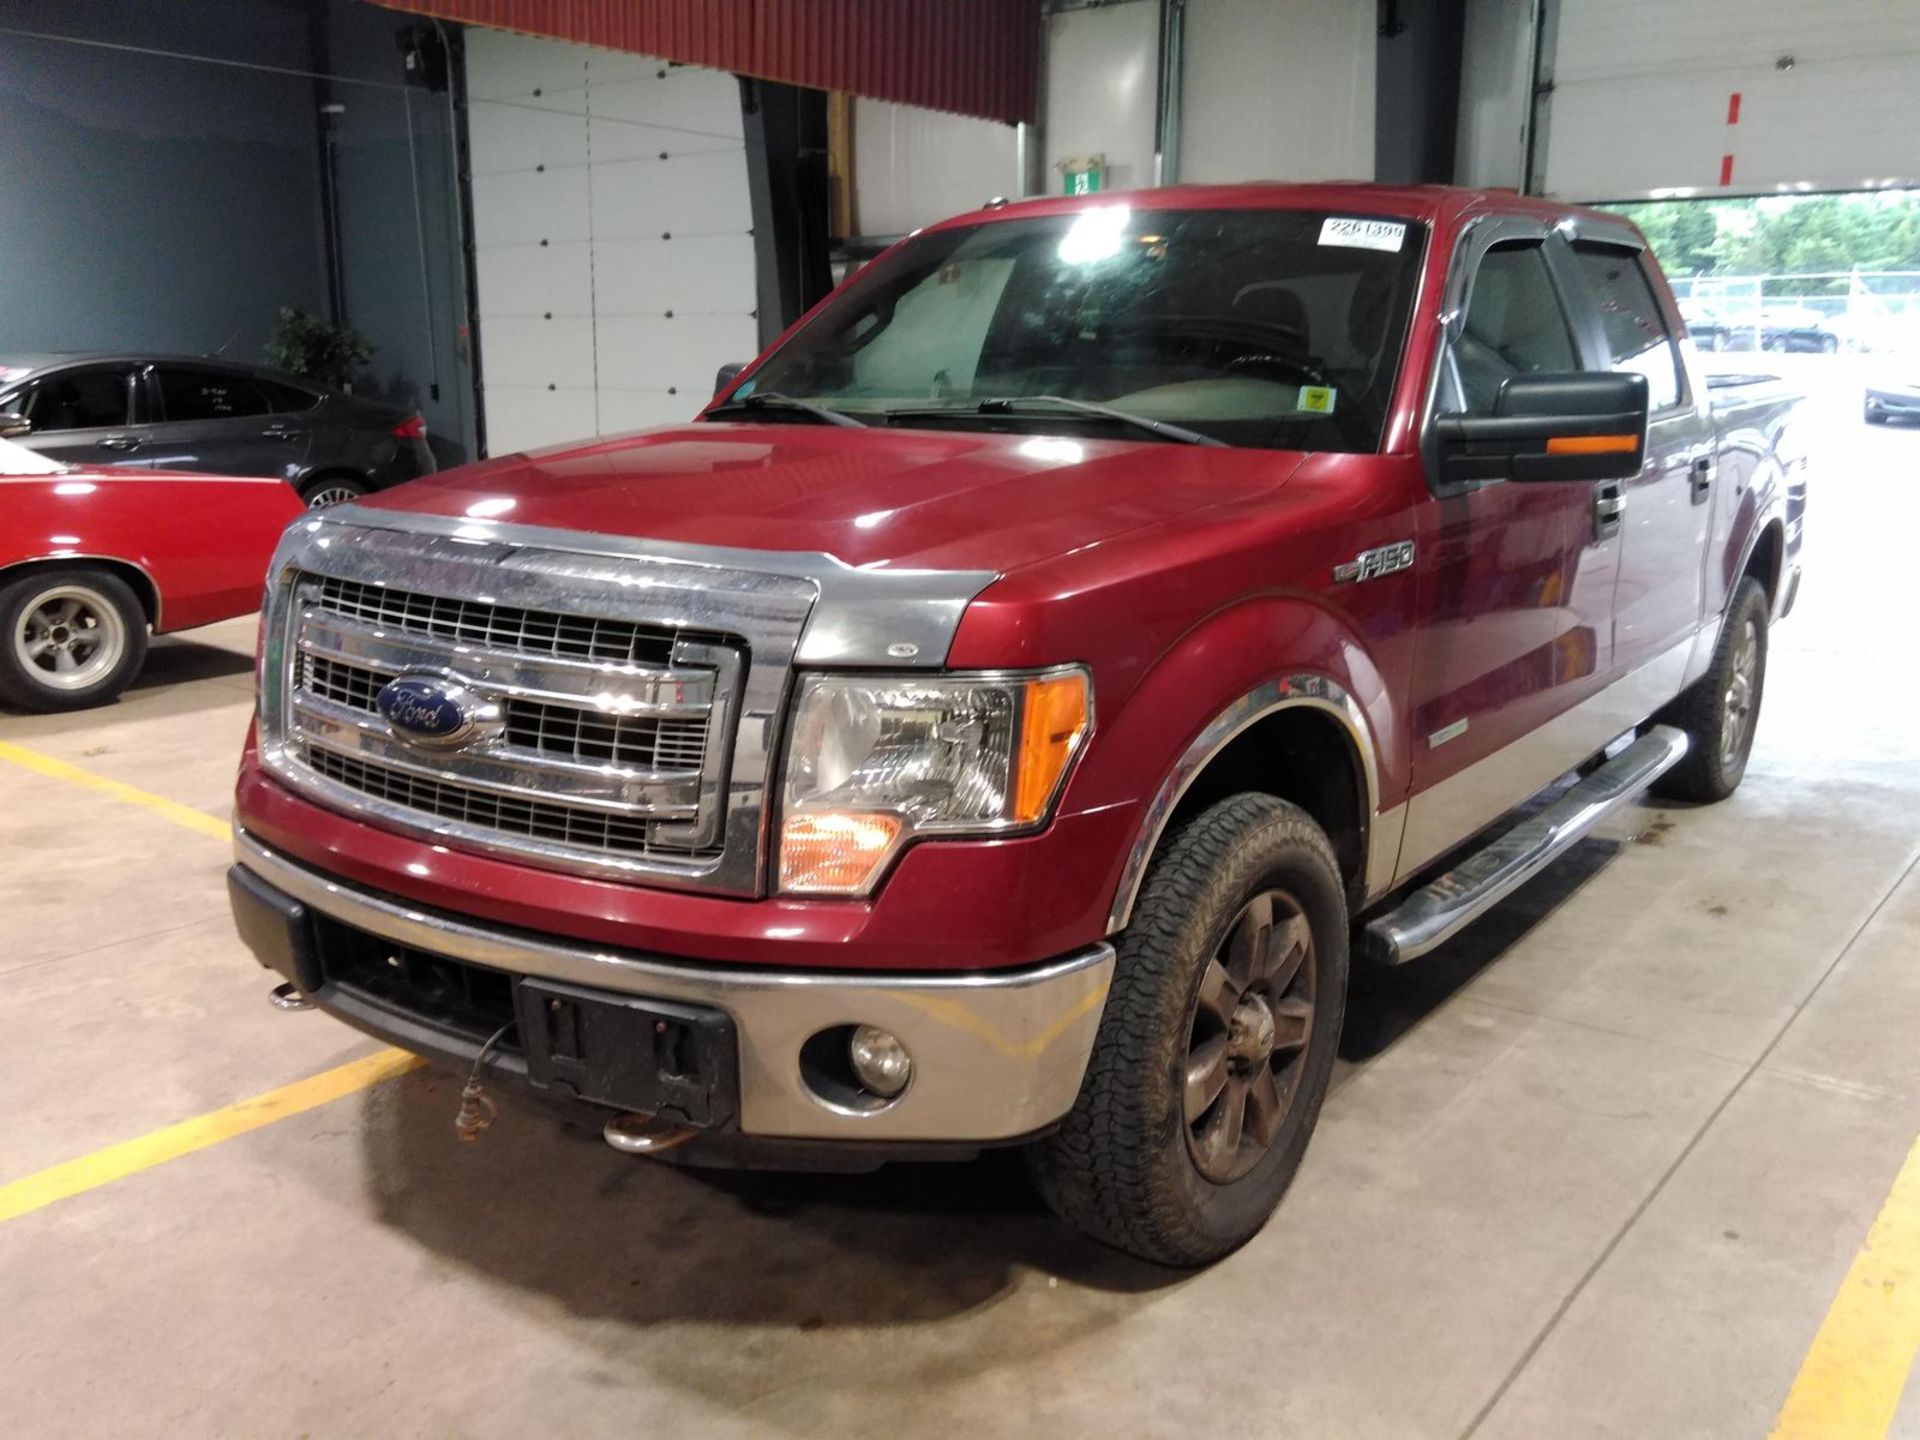 ** ON SALE ** Ford F-150 3.5L V6 XLT XTR Super Crew '2014 Year' Fresh Import - A/C - 4WD - Image 2 of 10